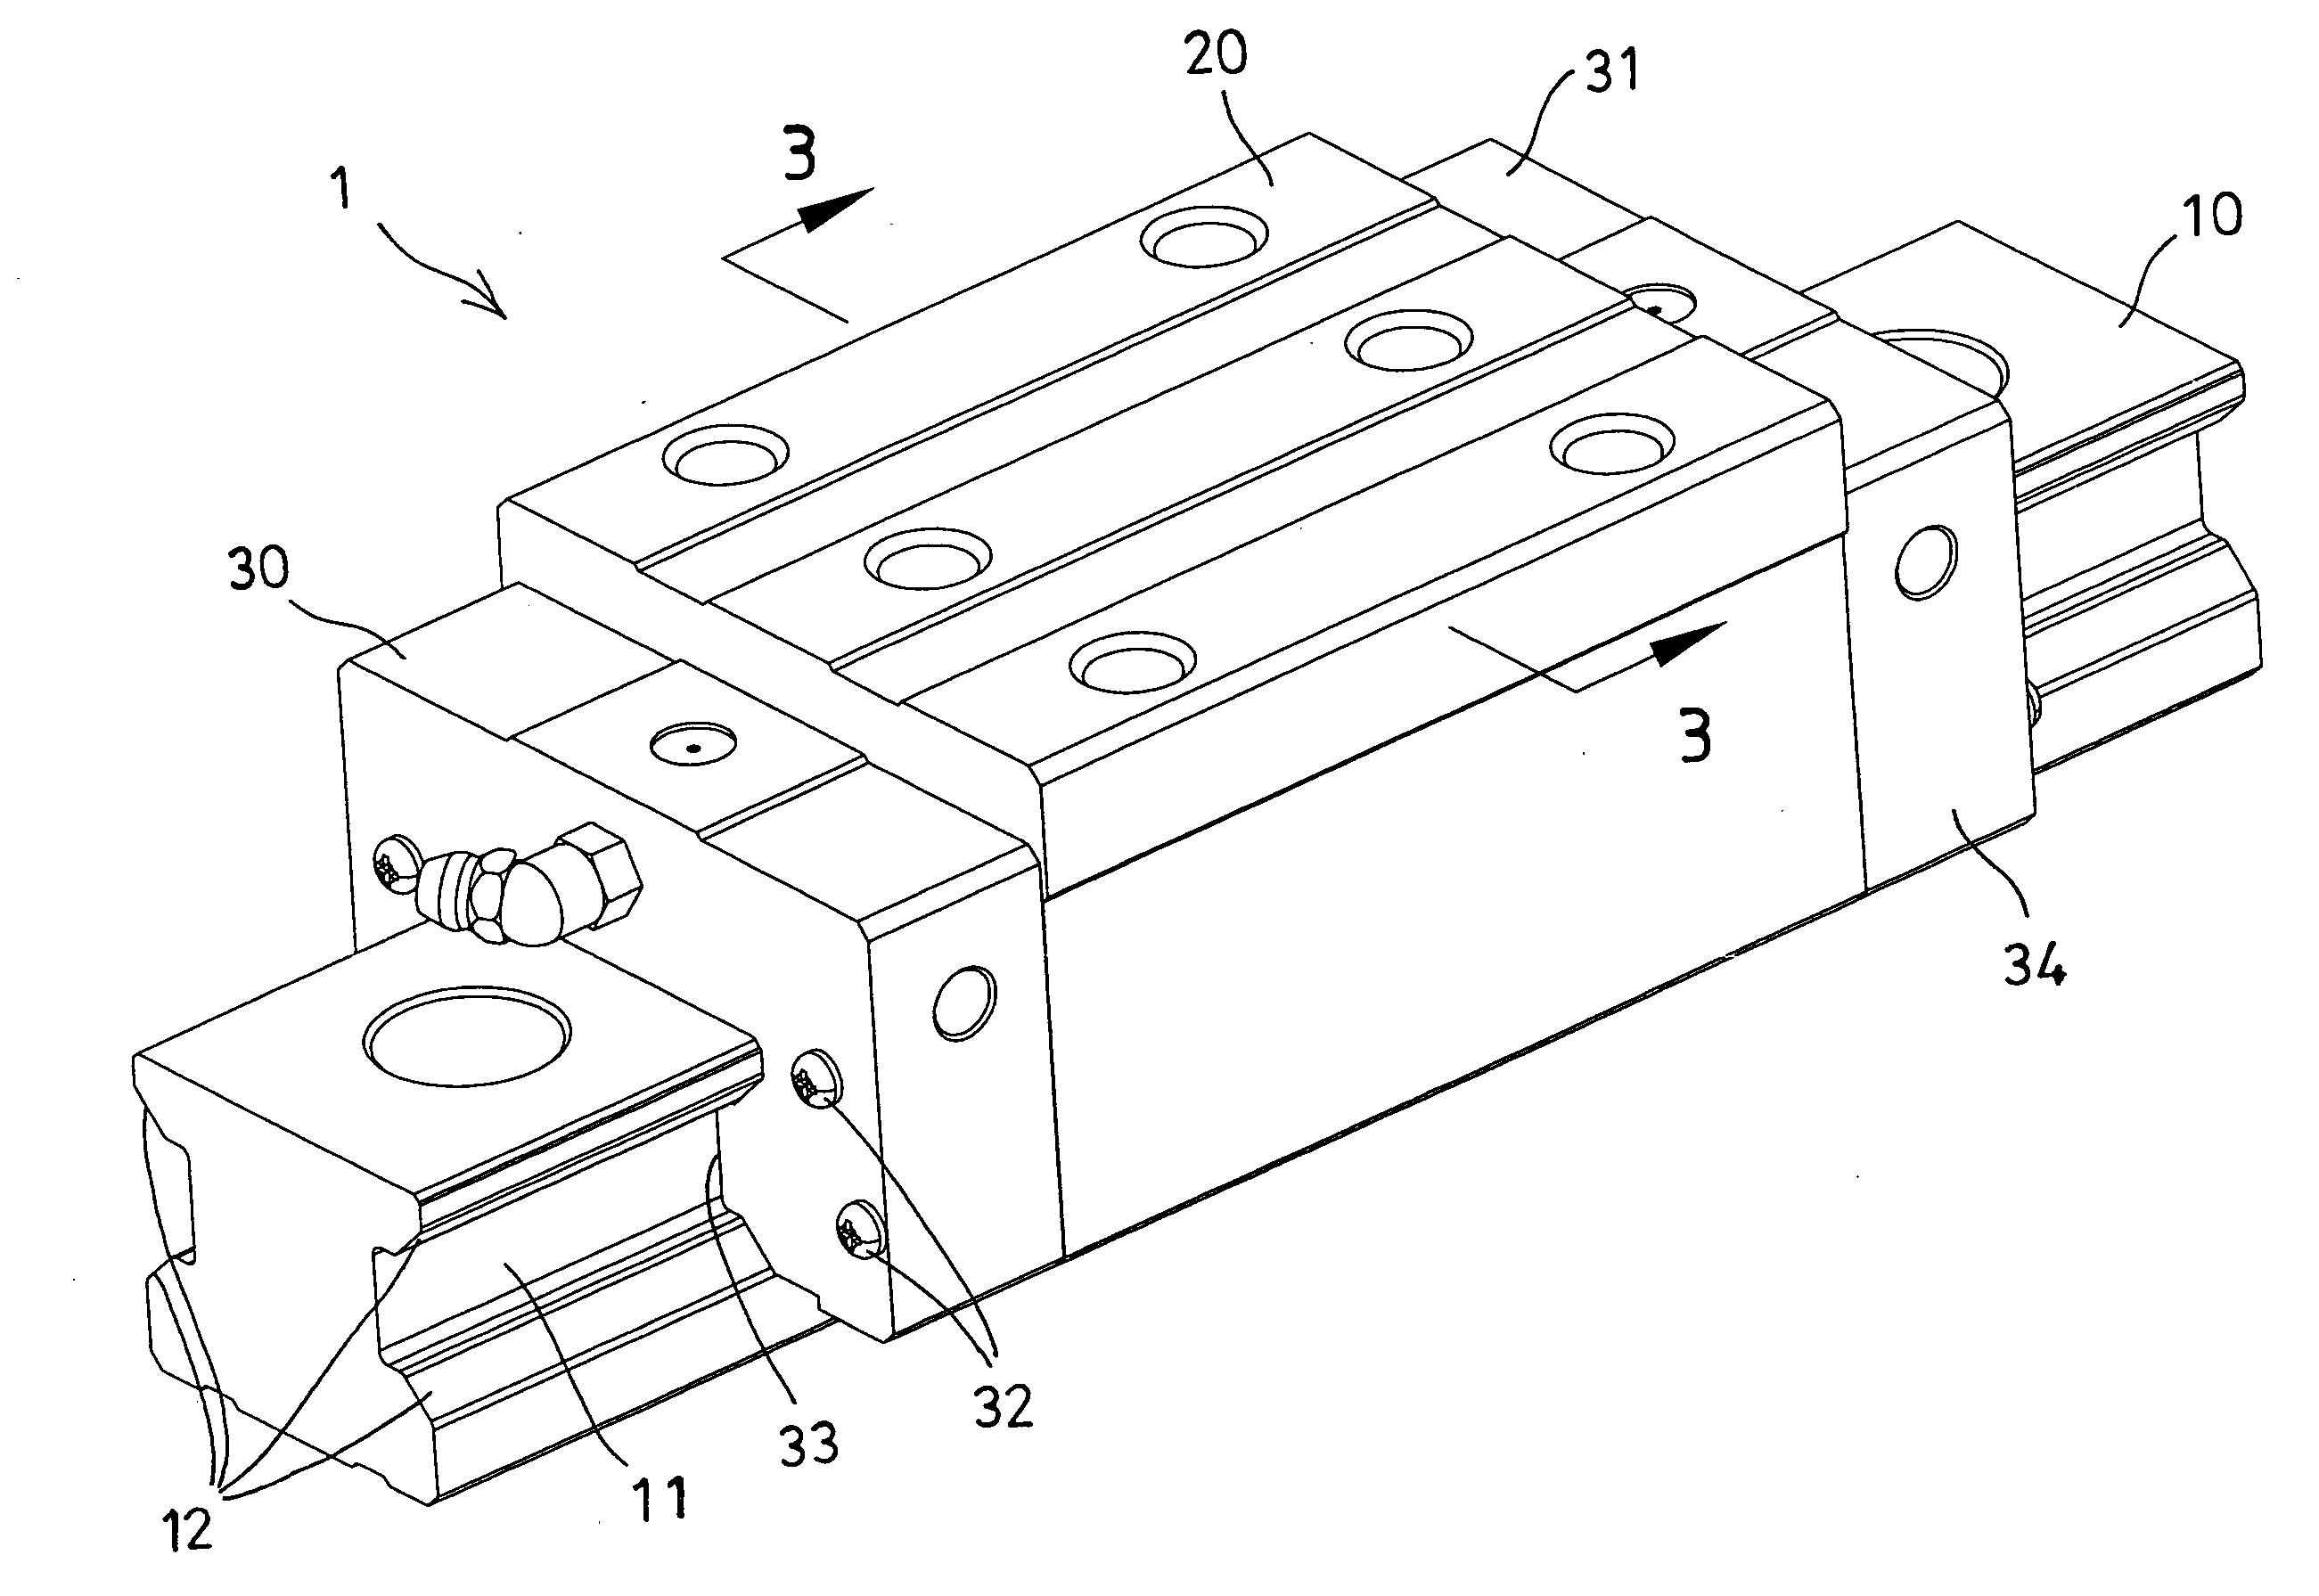 Linear motion guide apparatus